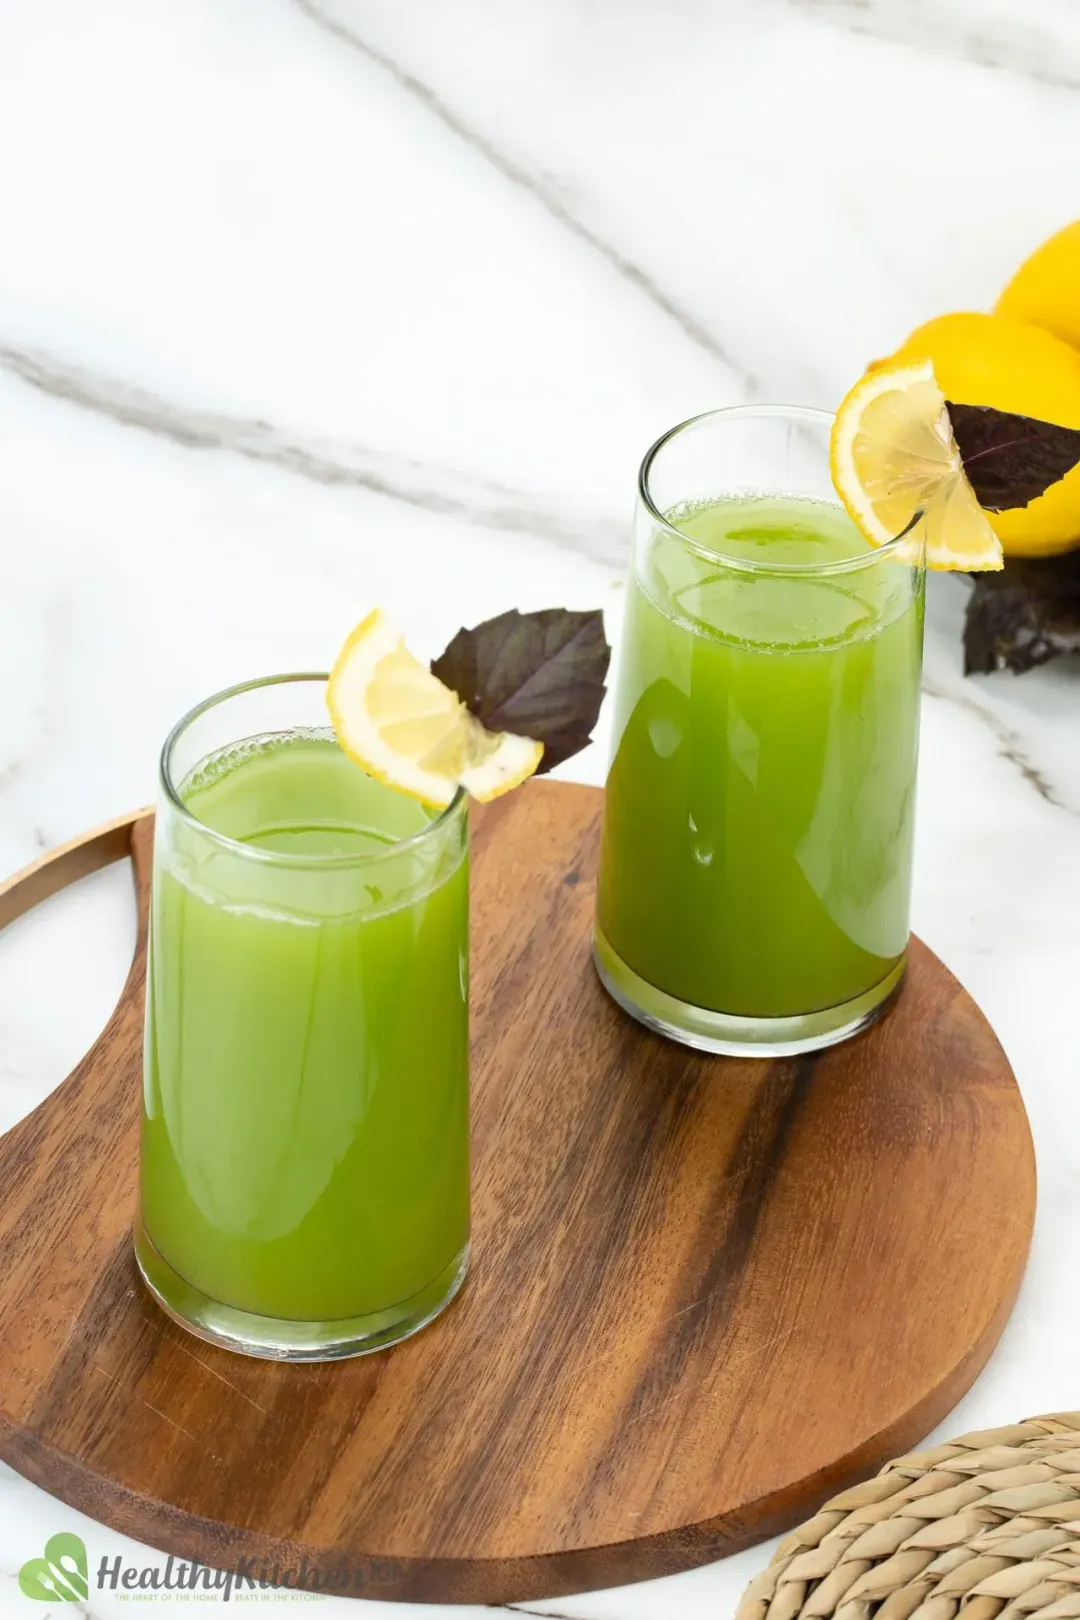 On a wooden plate, two glasses of cucumber lemon drinks both garnished with lemon wedges and purple leaves